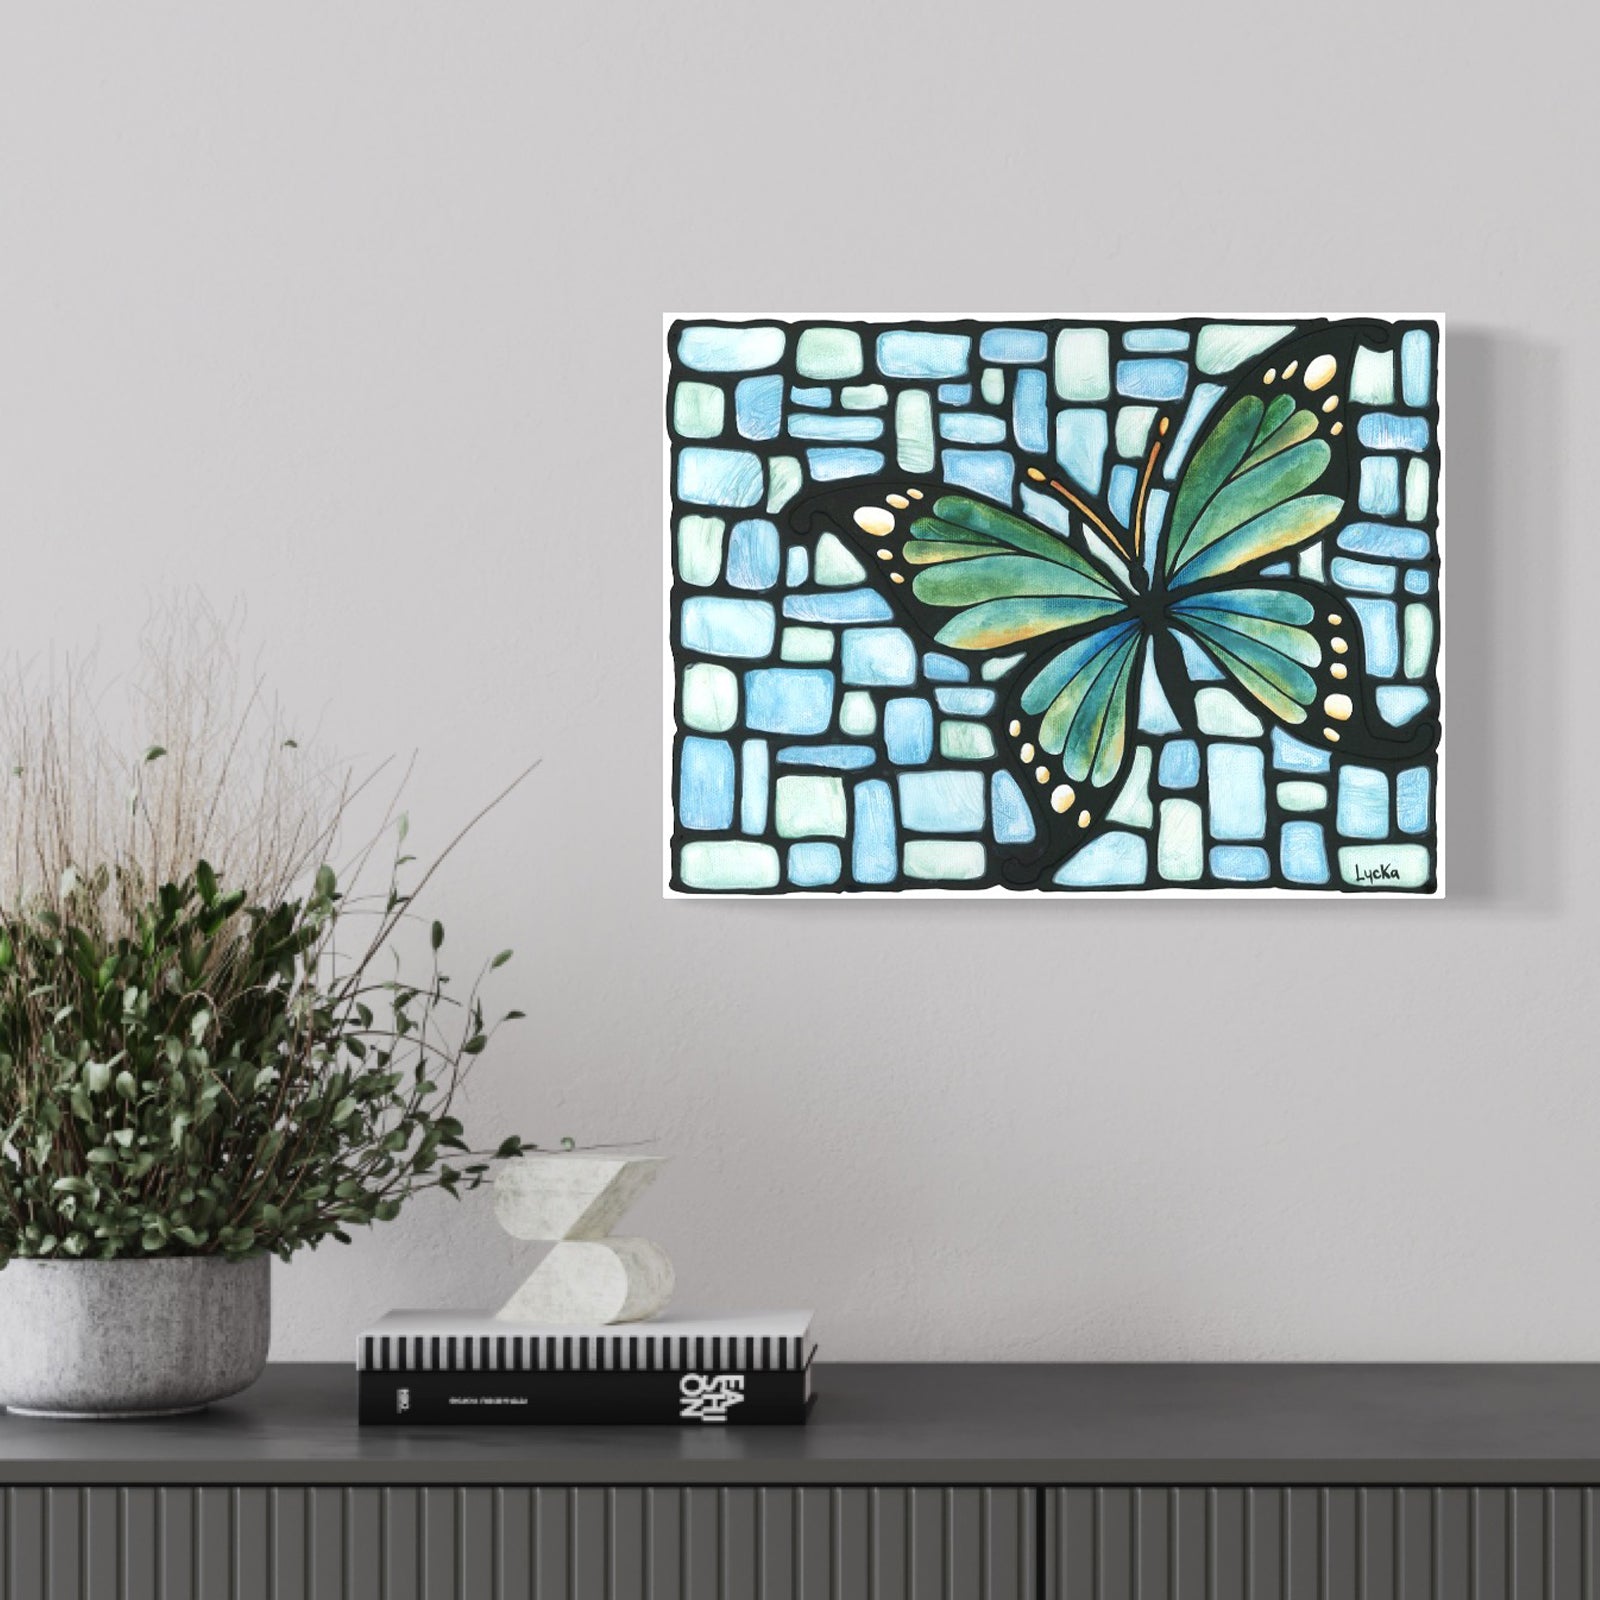 Teal Butterfly Original Painting 12 x 9 inch